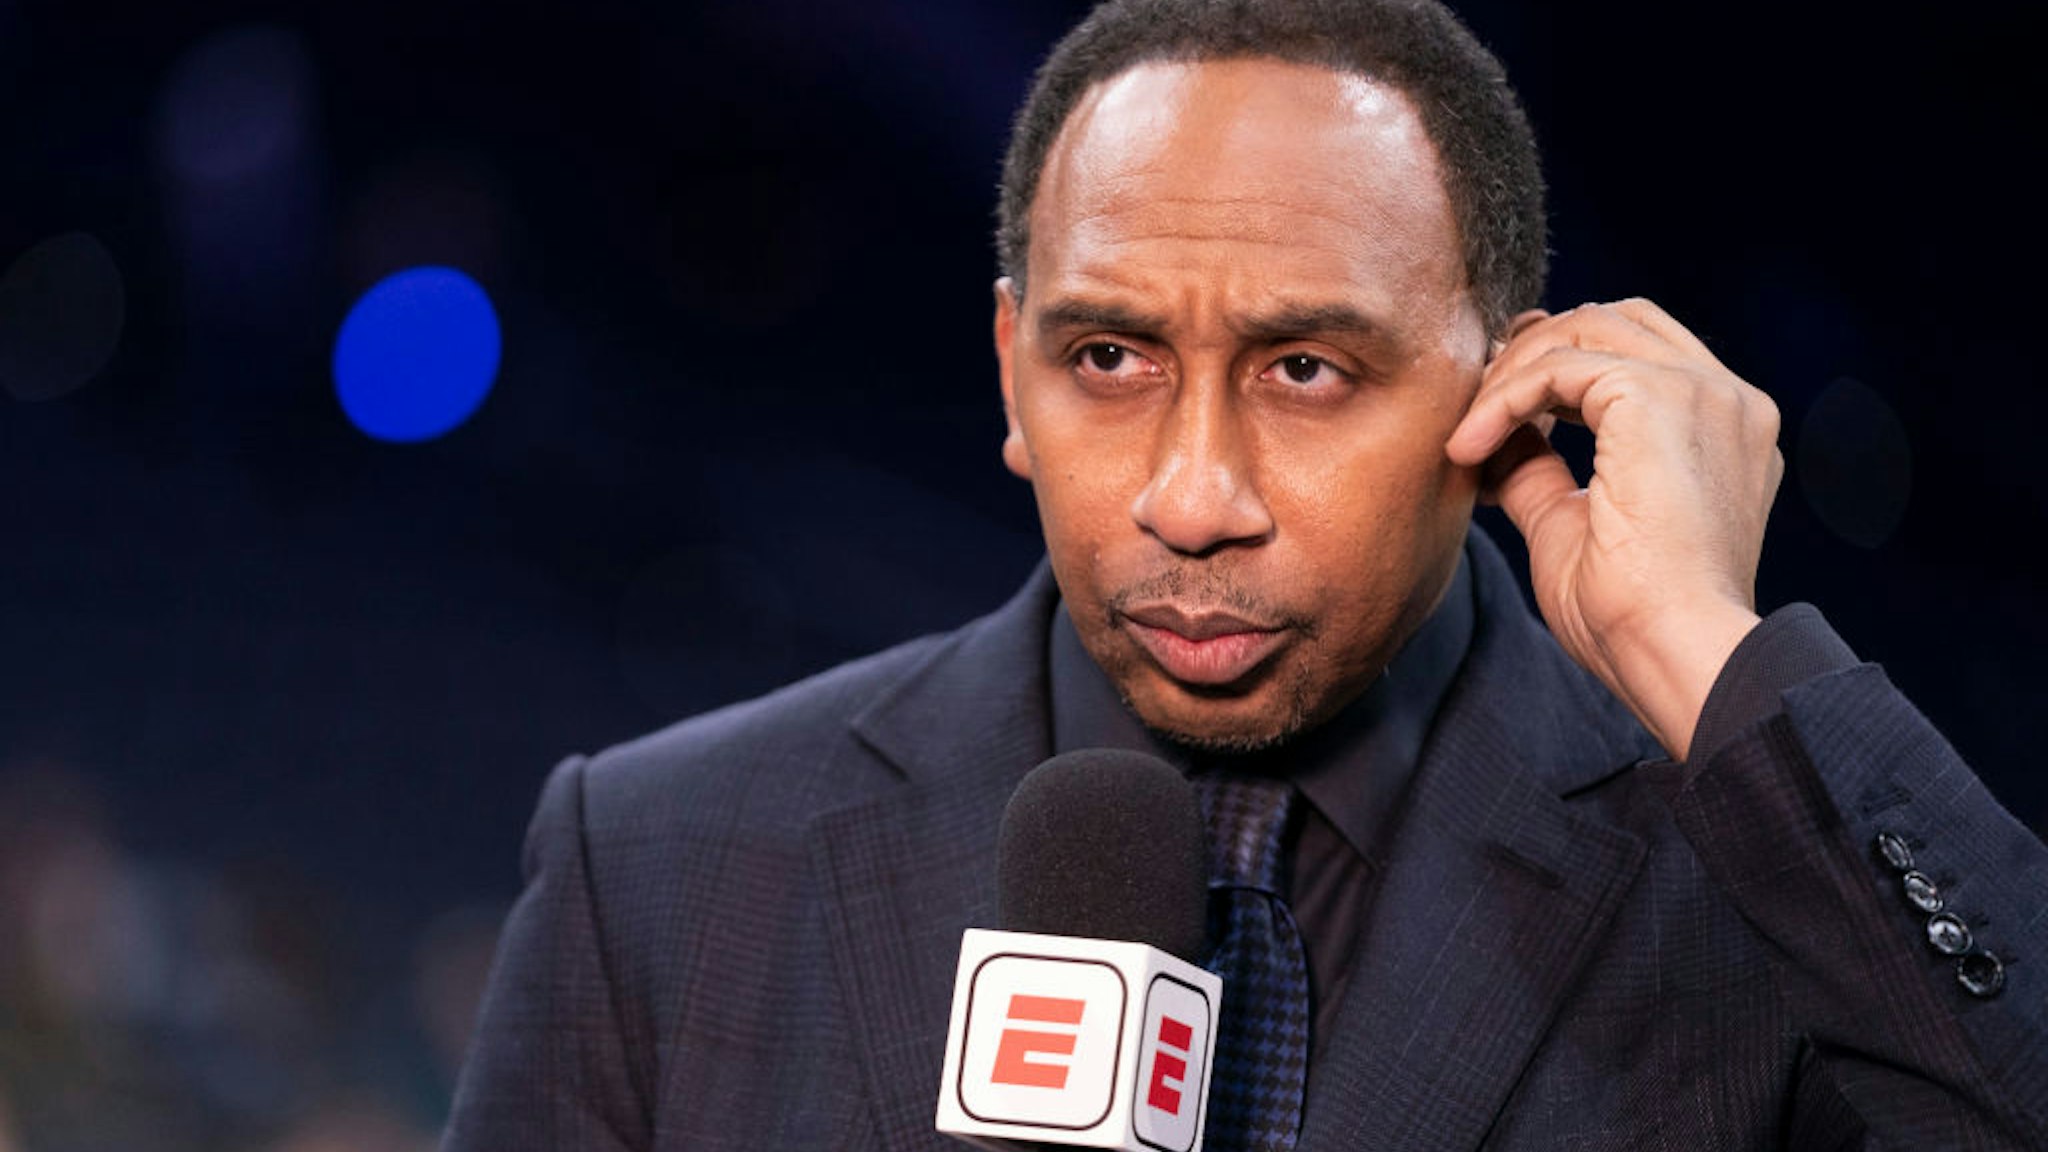 PHILADELPHIA, PA - DECEMBER 20: ESPN analyst Stephen A. Smith looks on prior to the game between the Dallas Mavericks and Philadelphia 76ers at the Wells Fargo Center on December 20, 2019 in Philadelphia, Pennsylvania. NOTE TO USER: User expressly acknowledges and agrees that, by downloading and/or using this photograph, user is consenting to the terms and conditions of the Getty Images License Agreement. (Photo by Mitchell Leff/Getty Images)